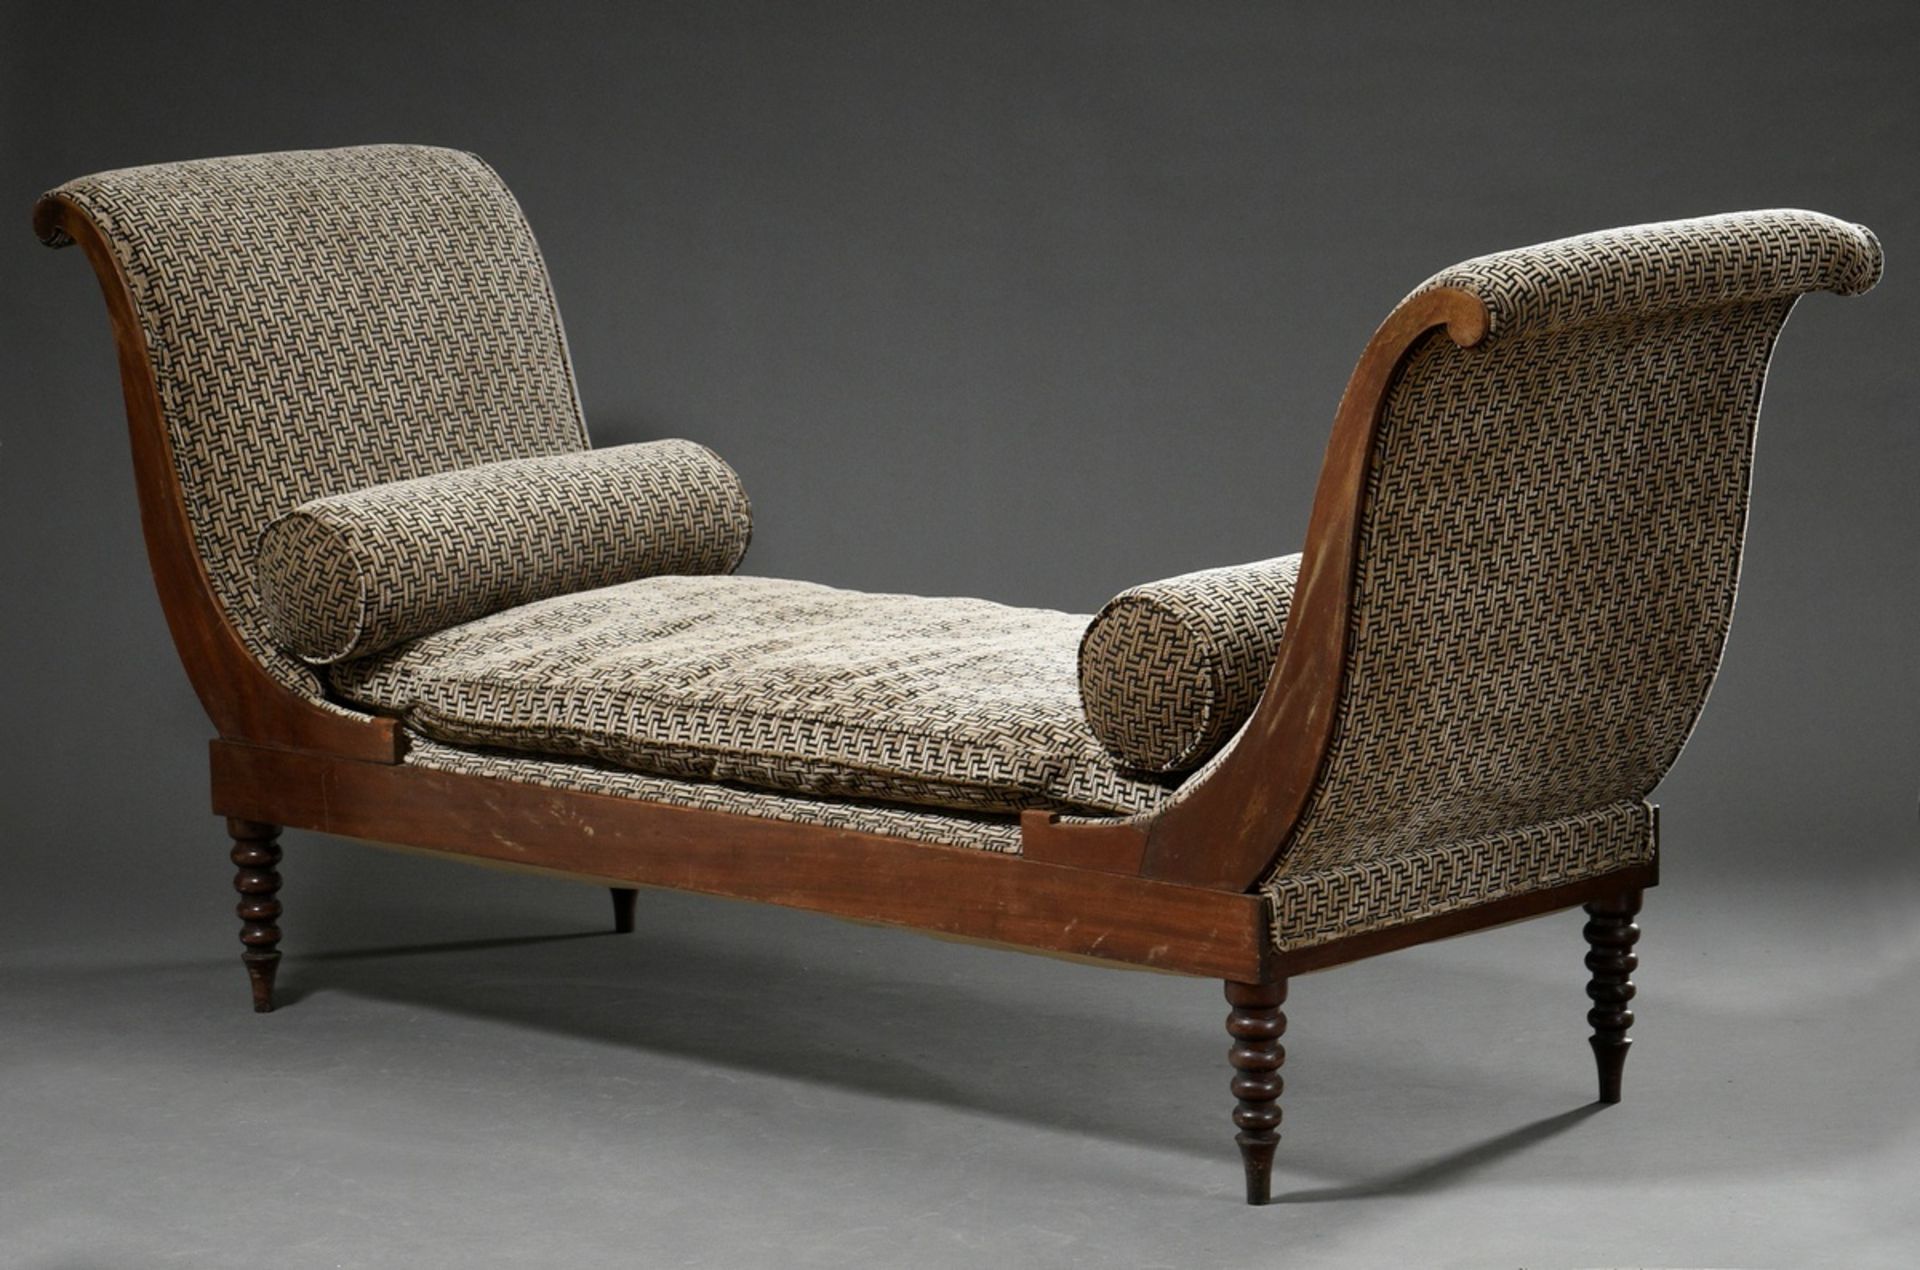 Elegantly curved récamière on turned legs of conically diminishing spheres, mahogany with modern up